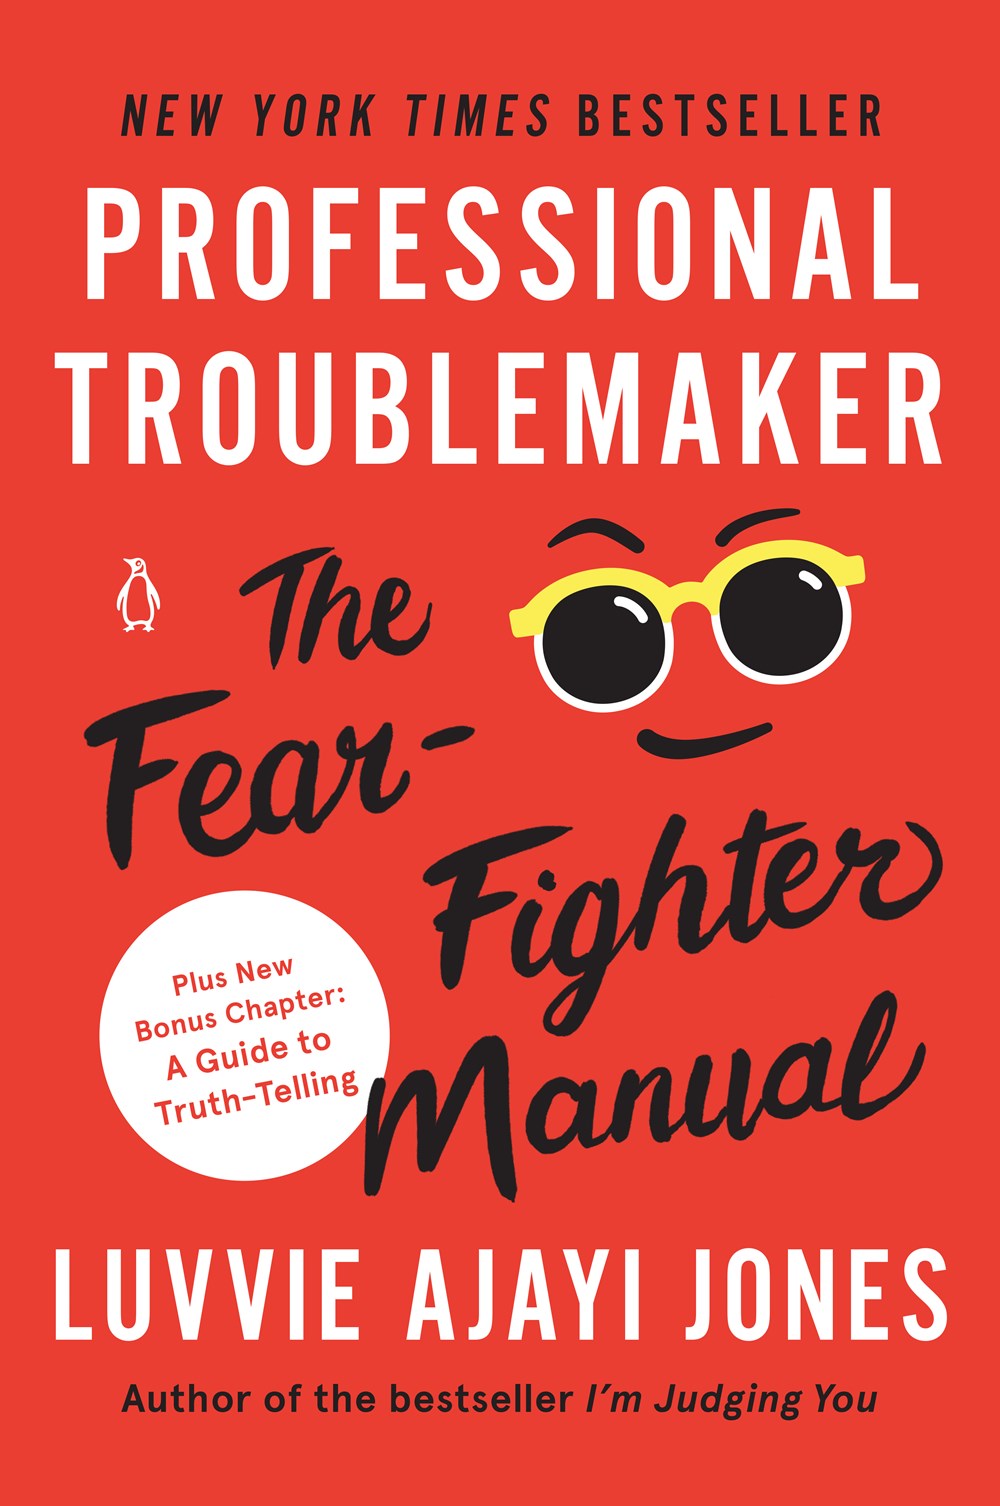 Professional Troublemaker: The Fear-Fighting Manual by Luvvie Ajayi Jones (Paperback)